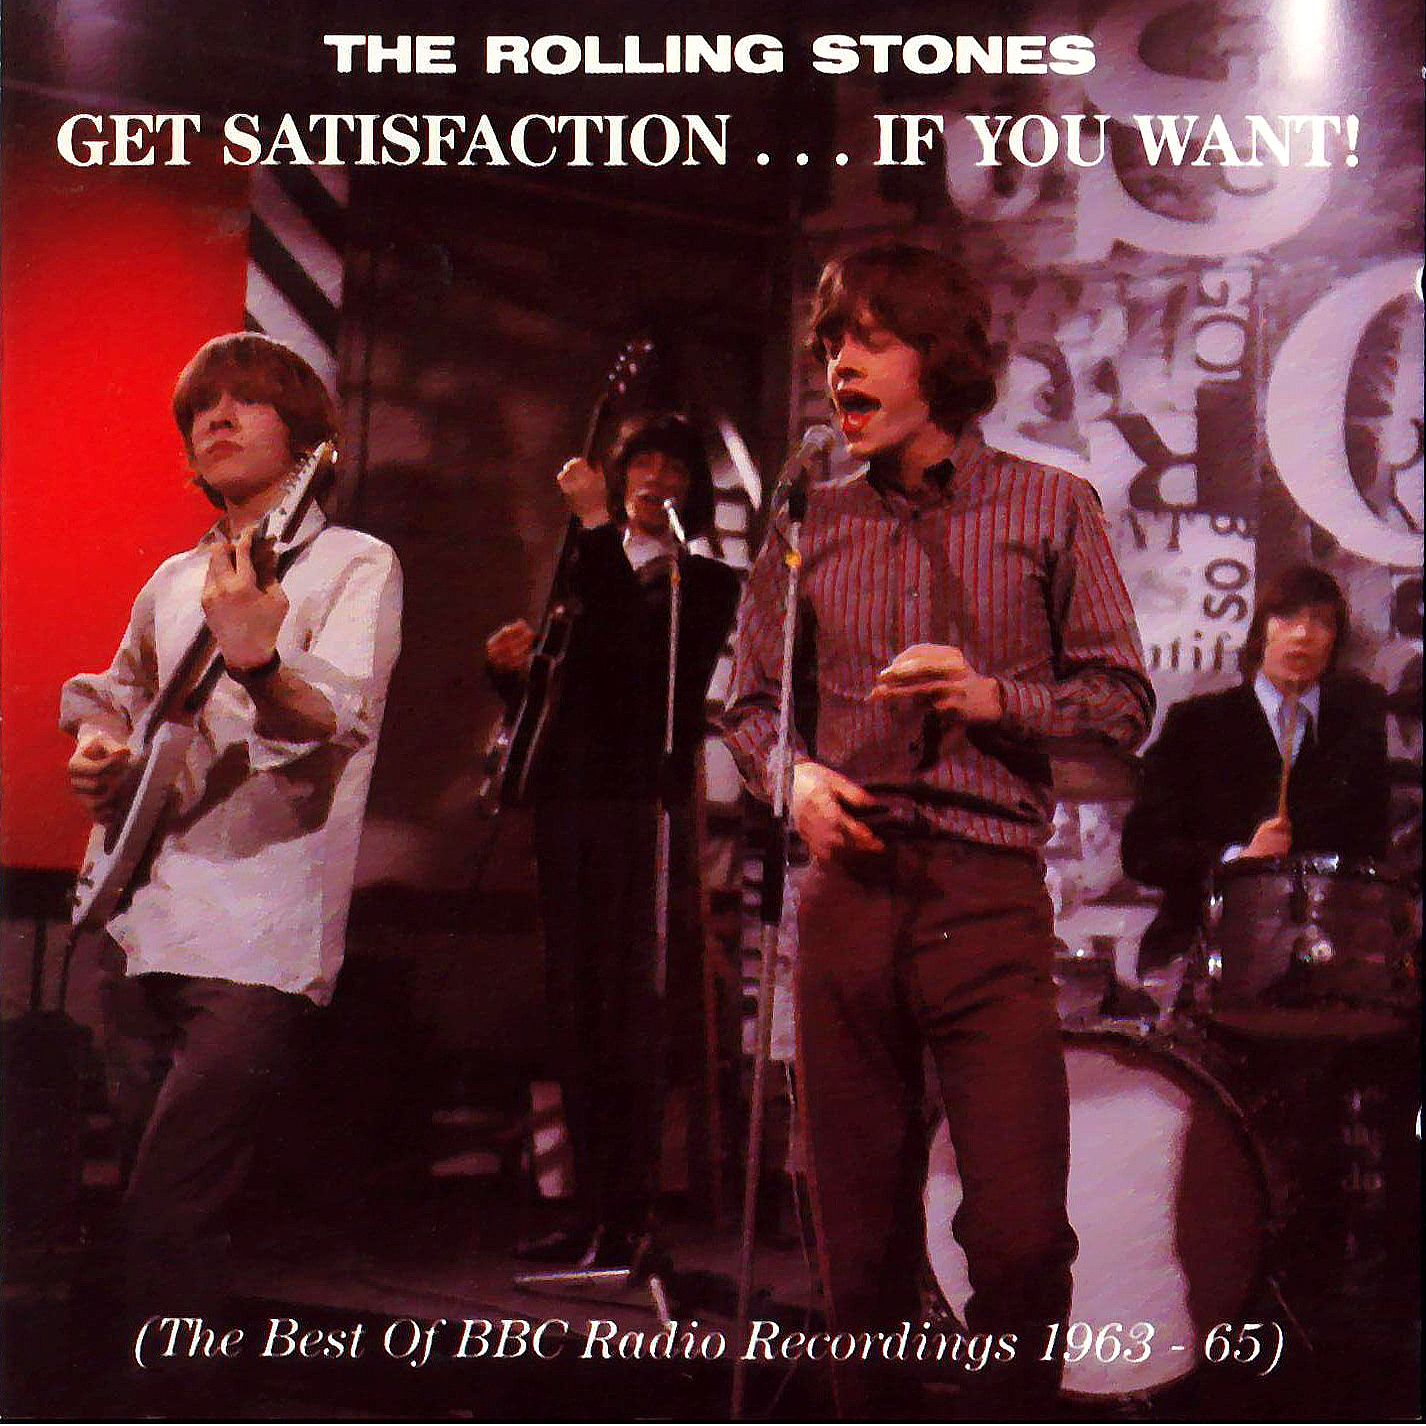 Rolling stones get. Роллинг стоунз satisfaction. Роллинг стоунз сатисфекшн фото. The Rolling Stones - satisfaction (1965). Обложка для mp3 satisfaction - the Rolling Stones (1965).